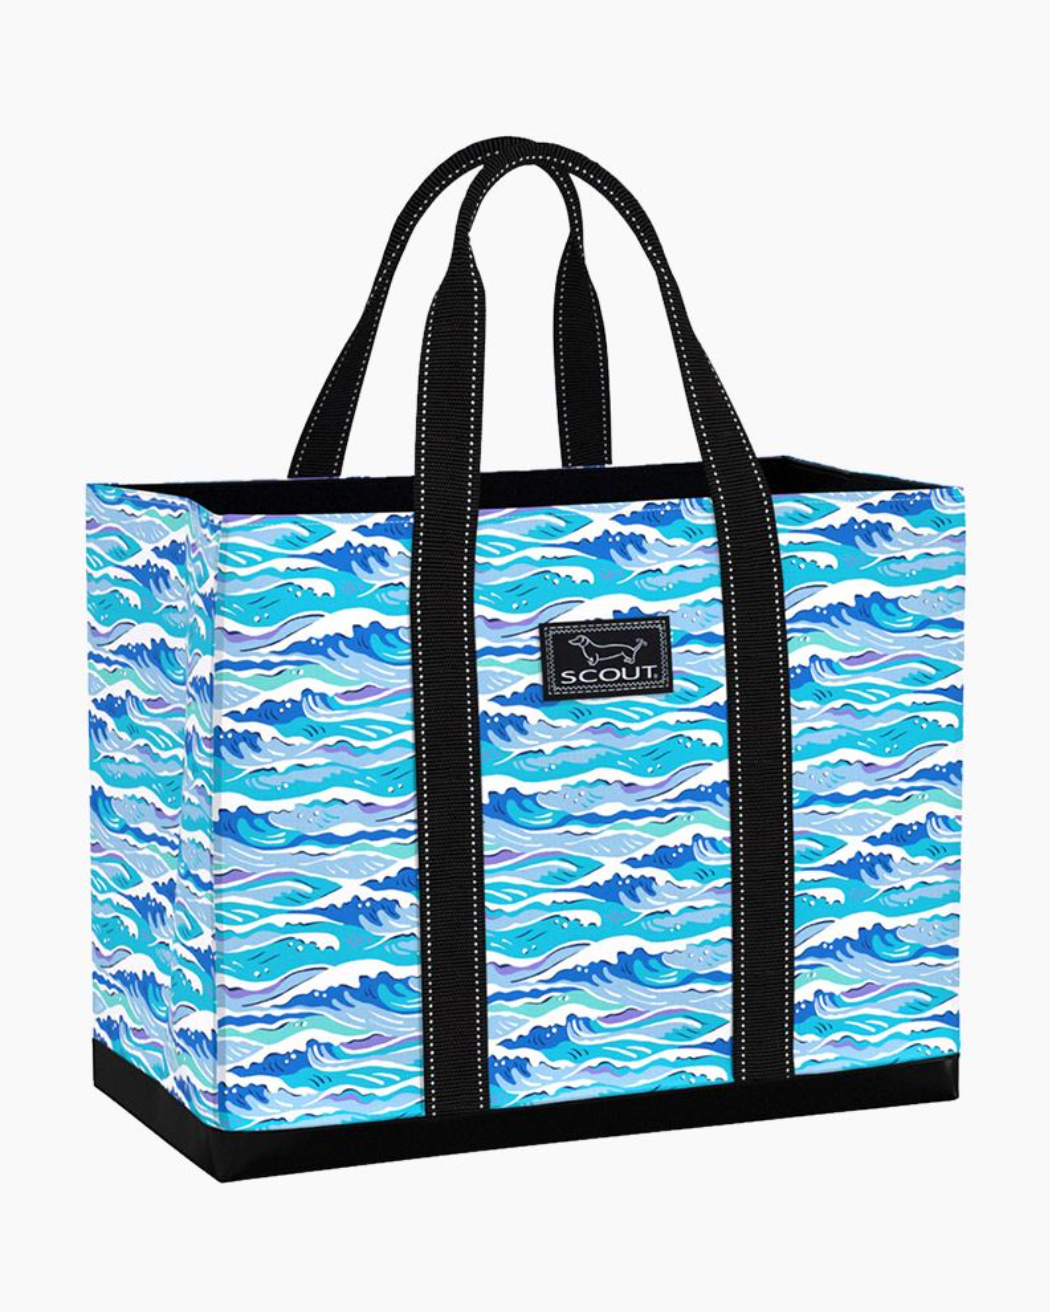 Scout Original Deano Tote Luggage, Totes in Making Waves at Wrapsody